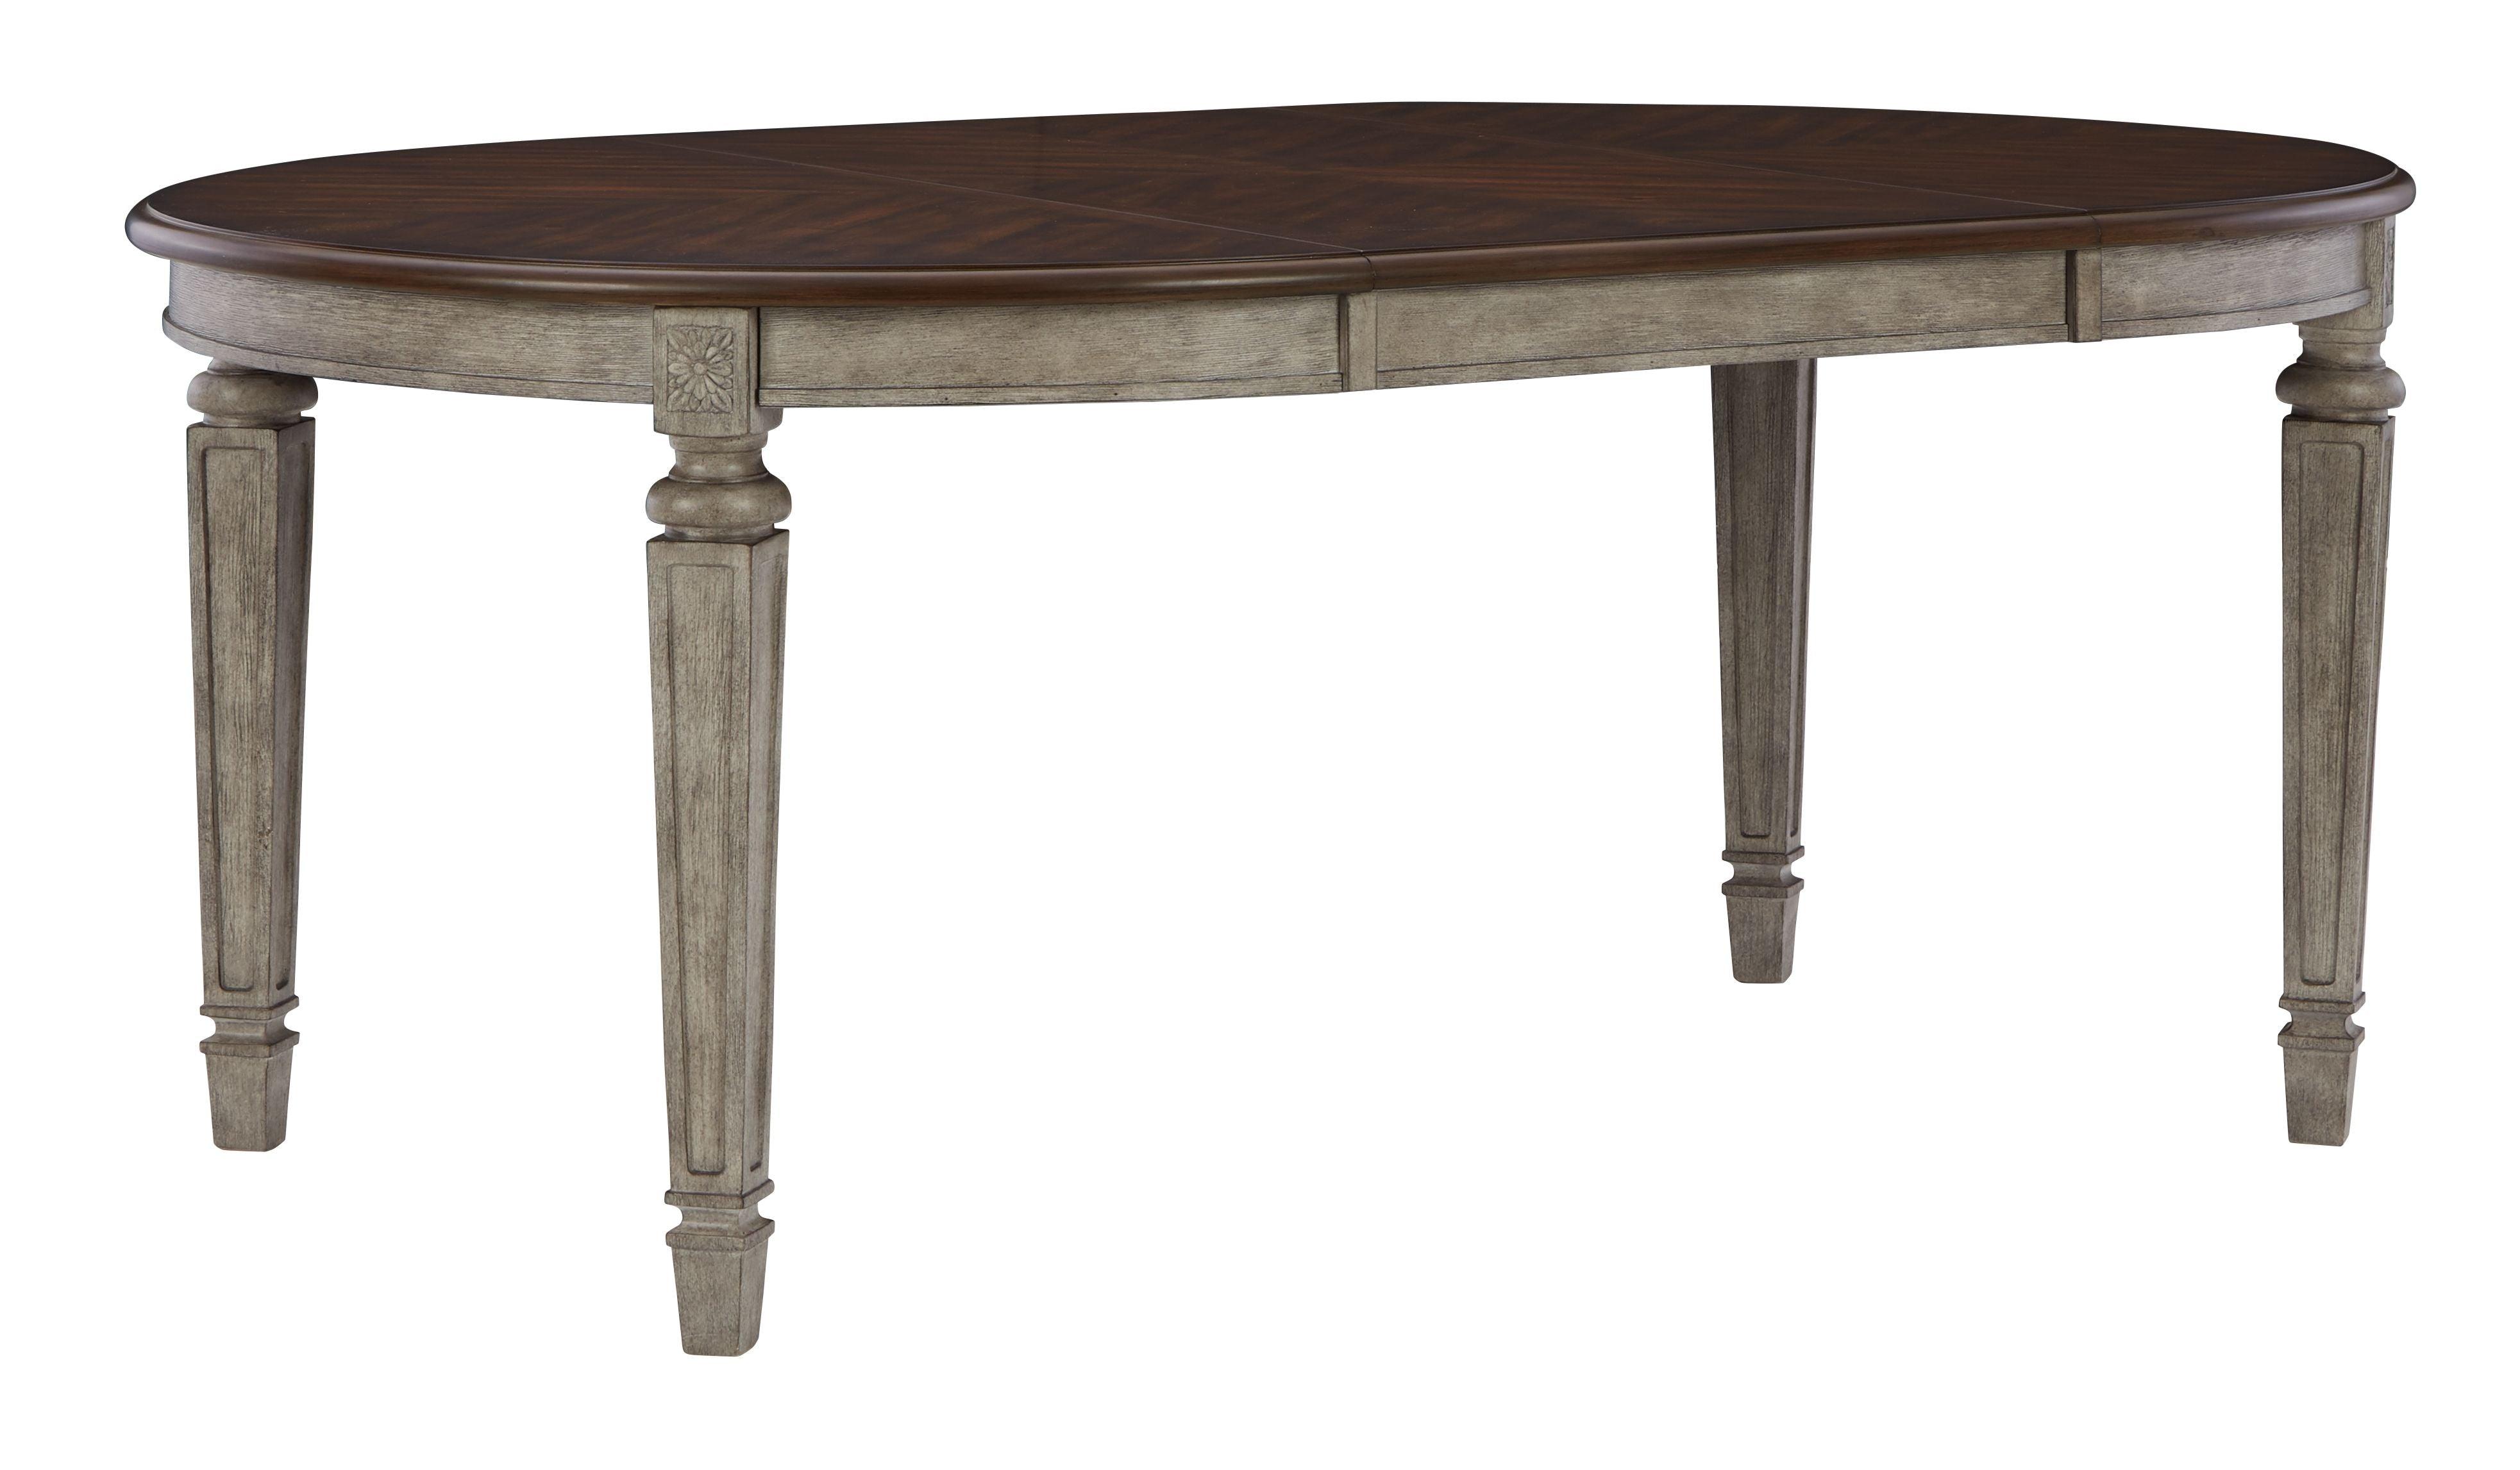 Signature Design by Ashley® - Lodenbay - Antique Gray - Oval Dining Room Extension Table - 5th Avenue Furniture